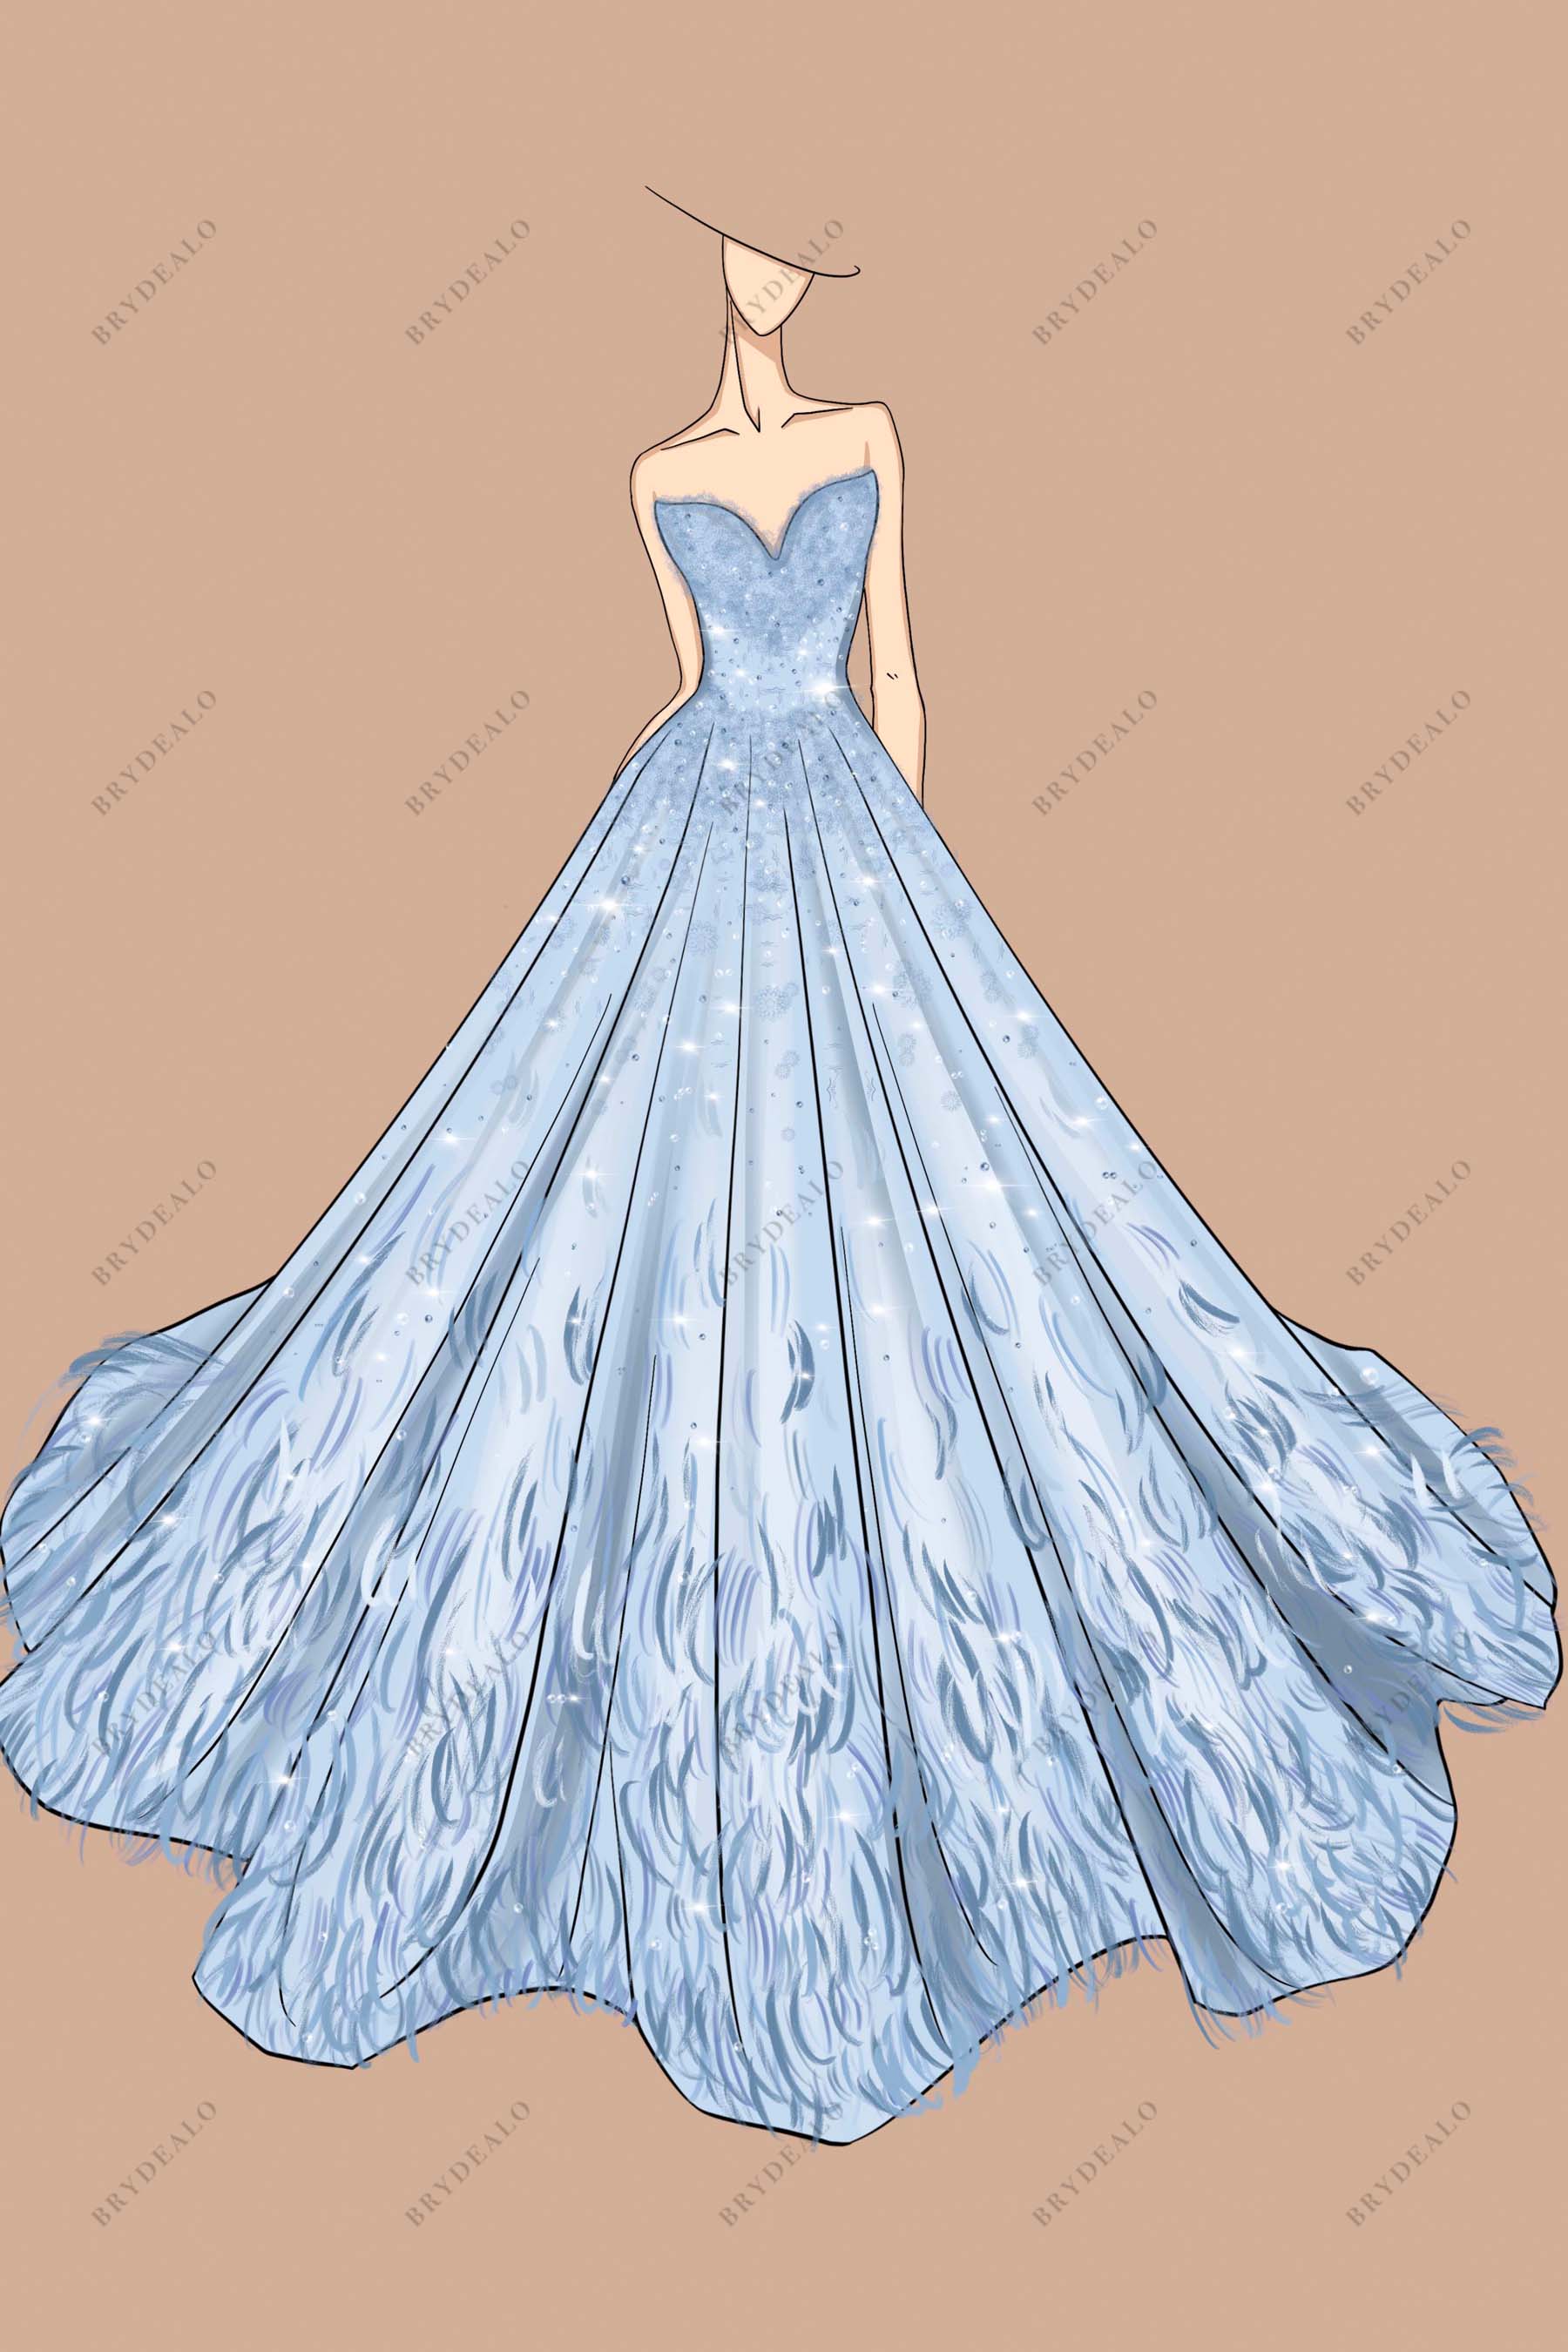 Sky Blue Designer Strapless Lace Feathers Wedding Ball Gown Sketch